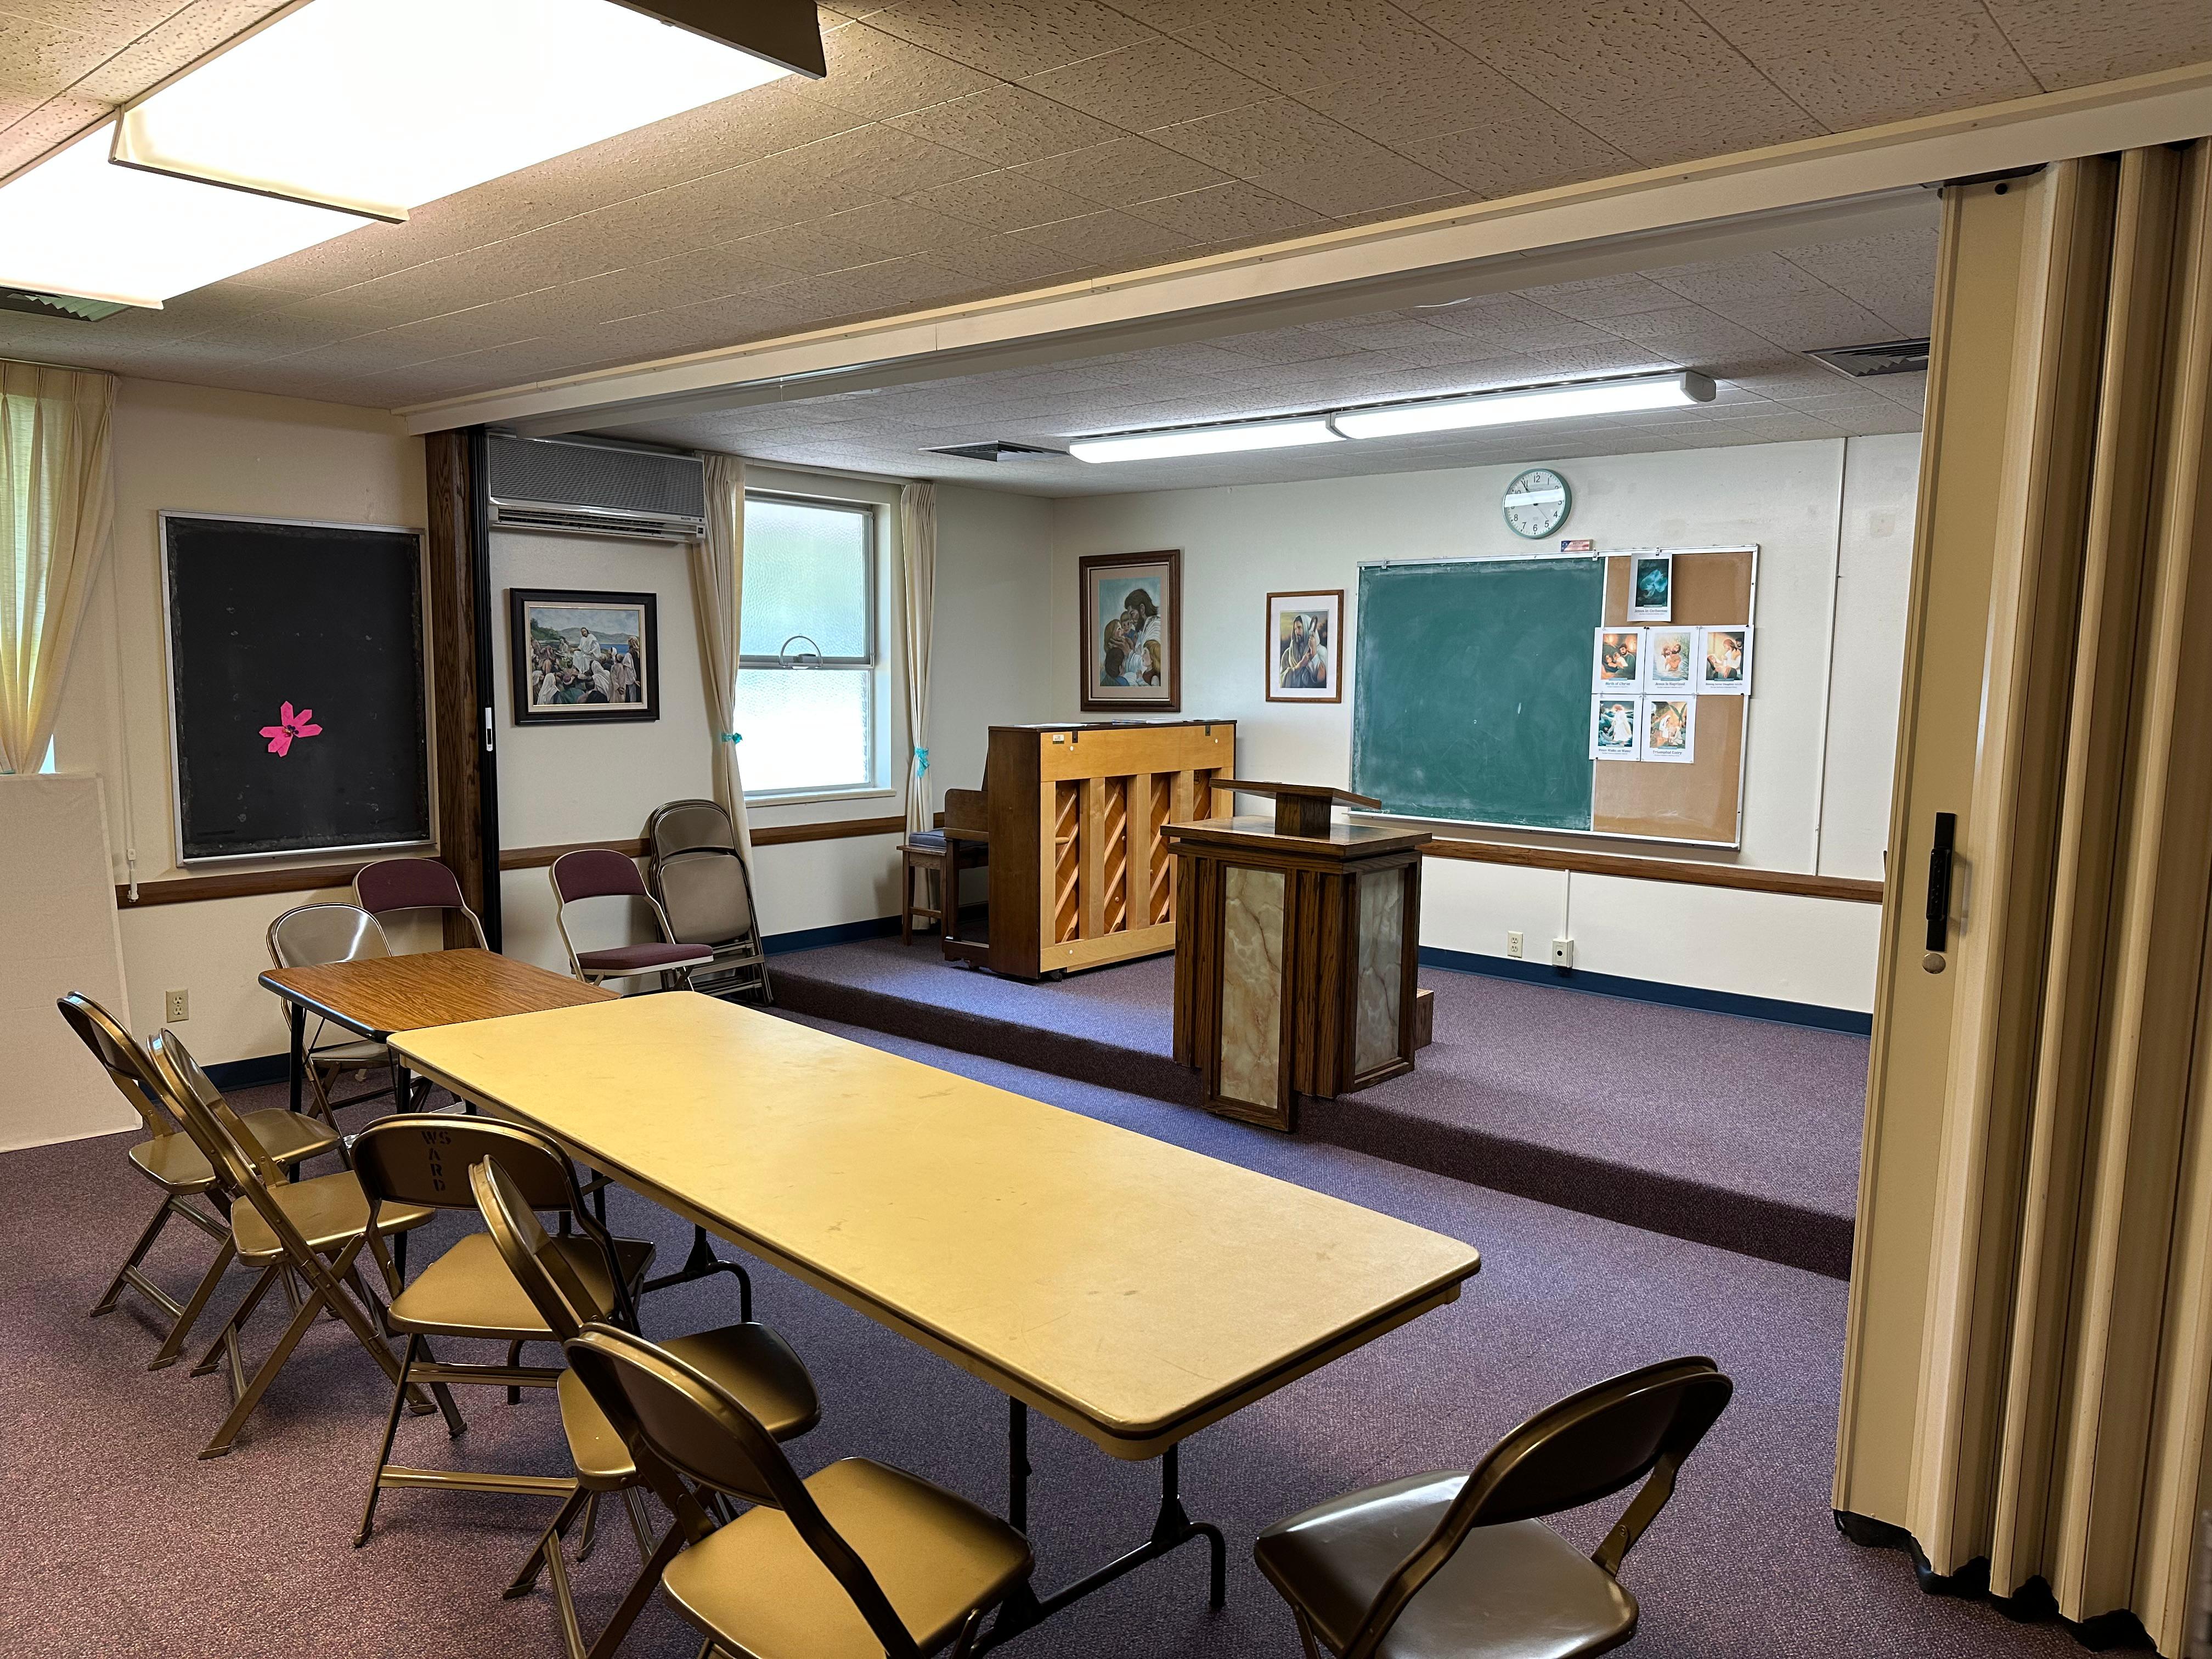 Primary Room Where Children Meet for Sunday School Lessons The Church of Jesus Christ of Latter-day Saints White Salmon (509)543-0458